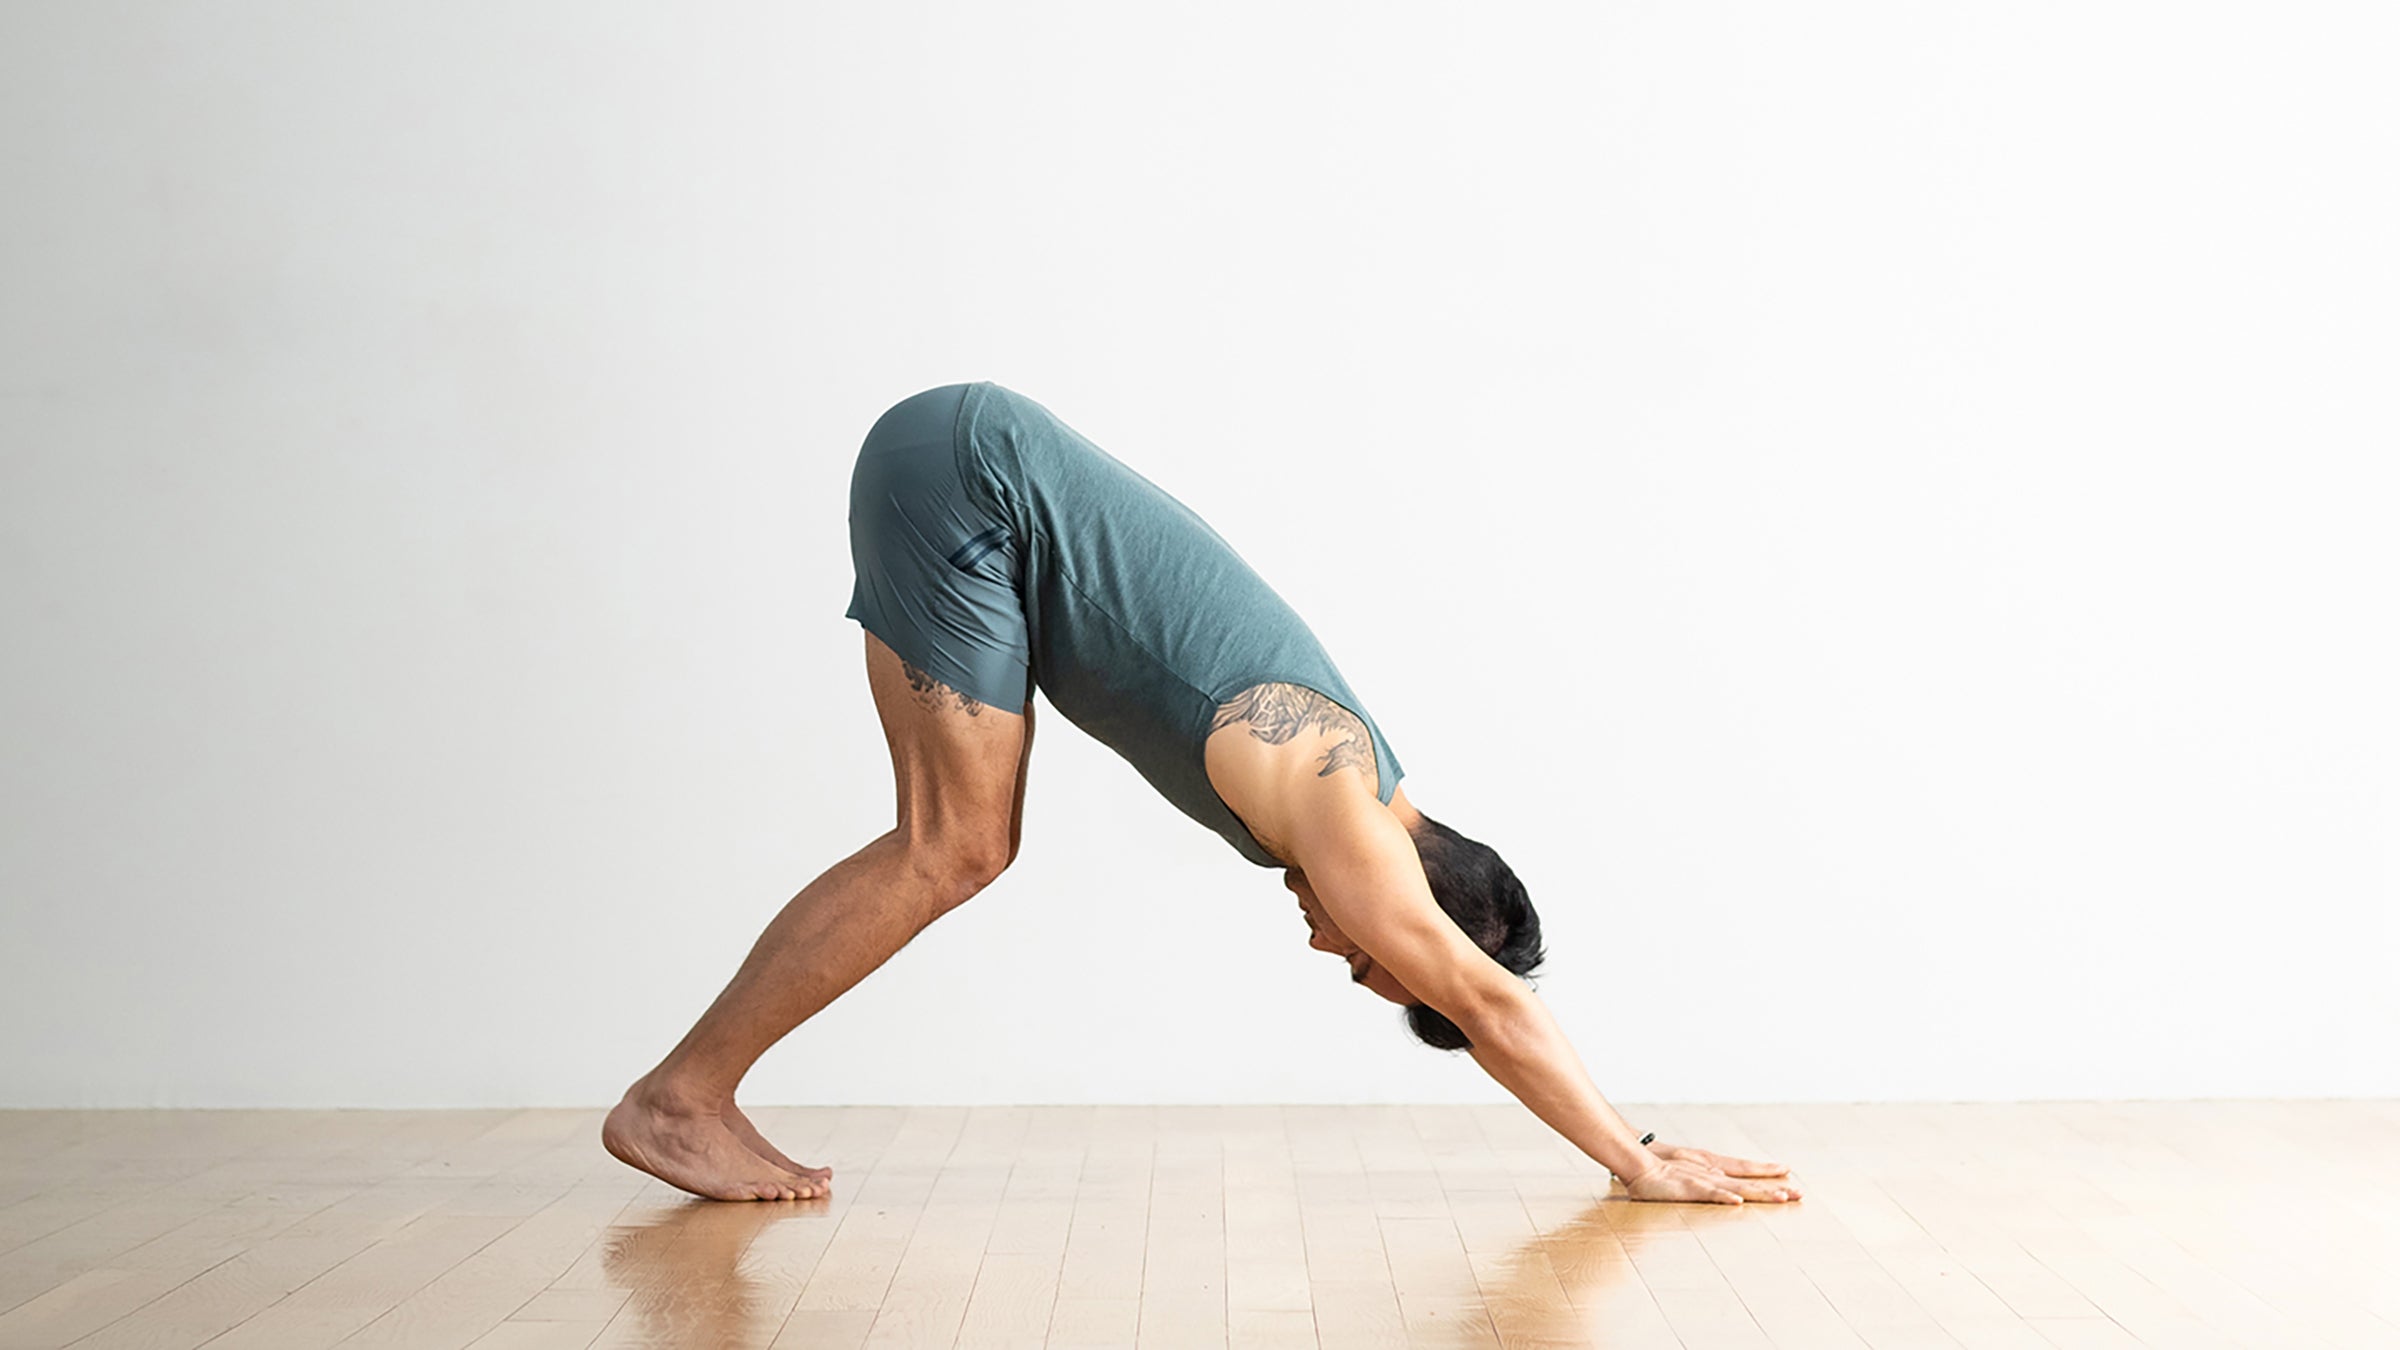 Yoga Pose of the Month: One-Legged Downward-Facing Dog